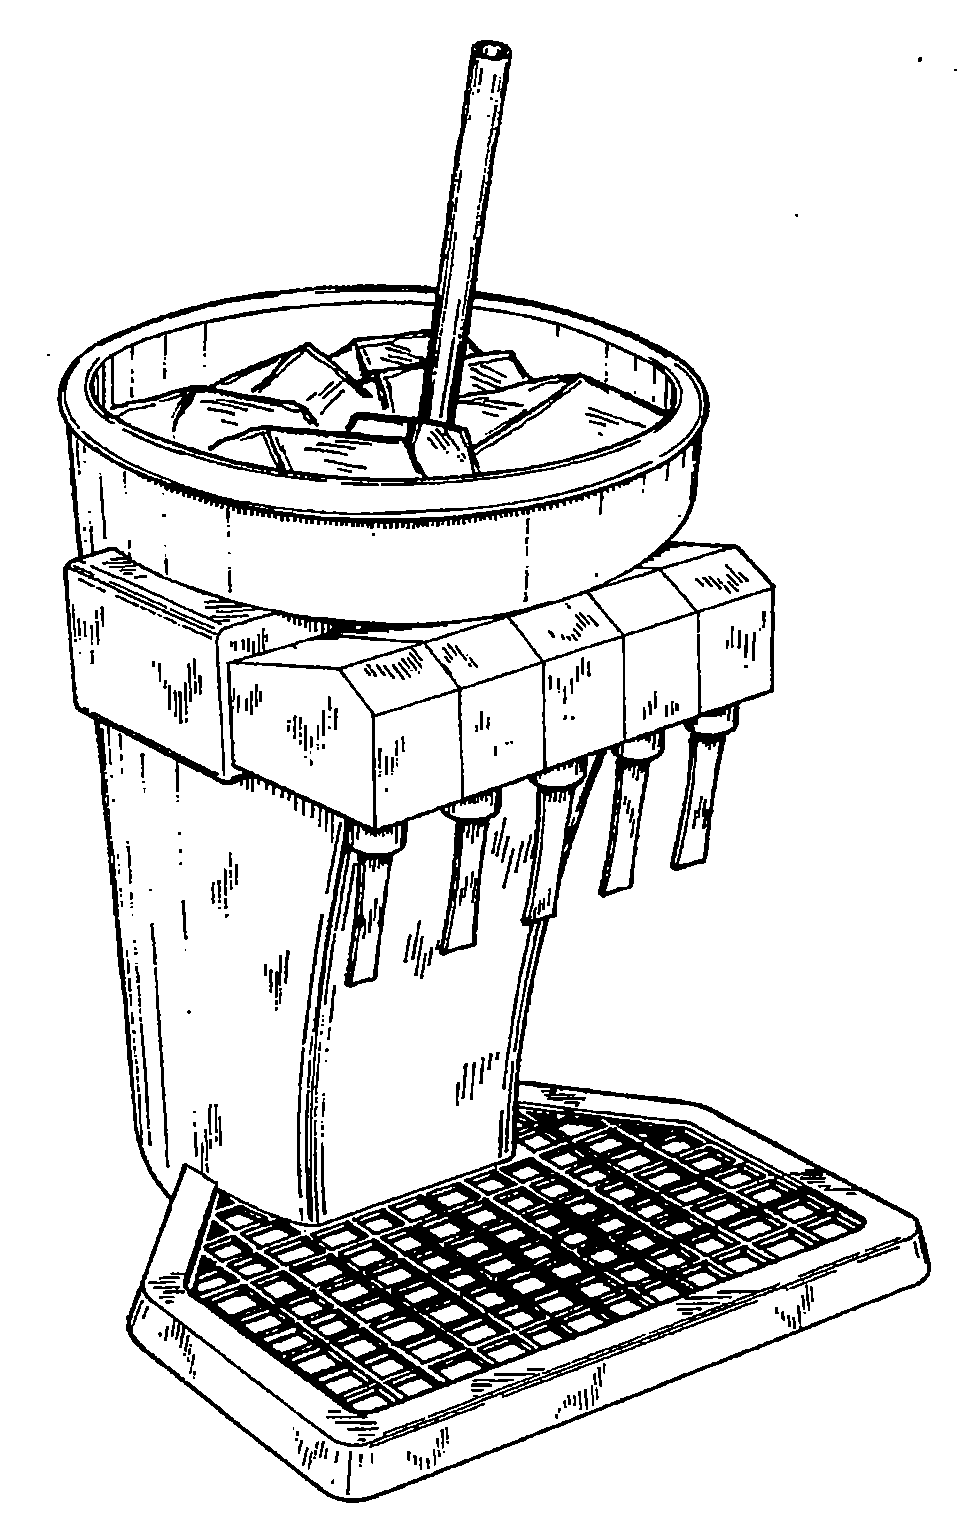 Example of a design for a serving a beverage with a simulativeappearance.
